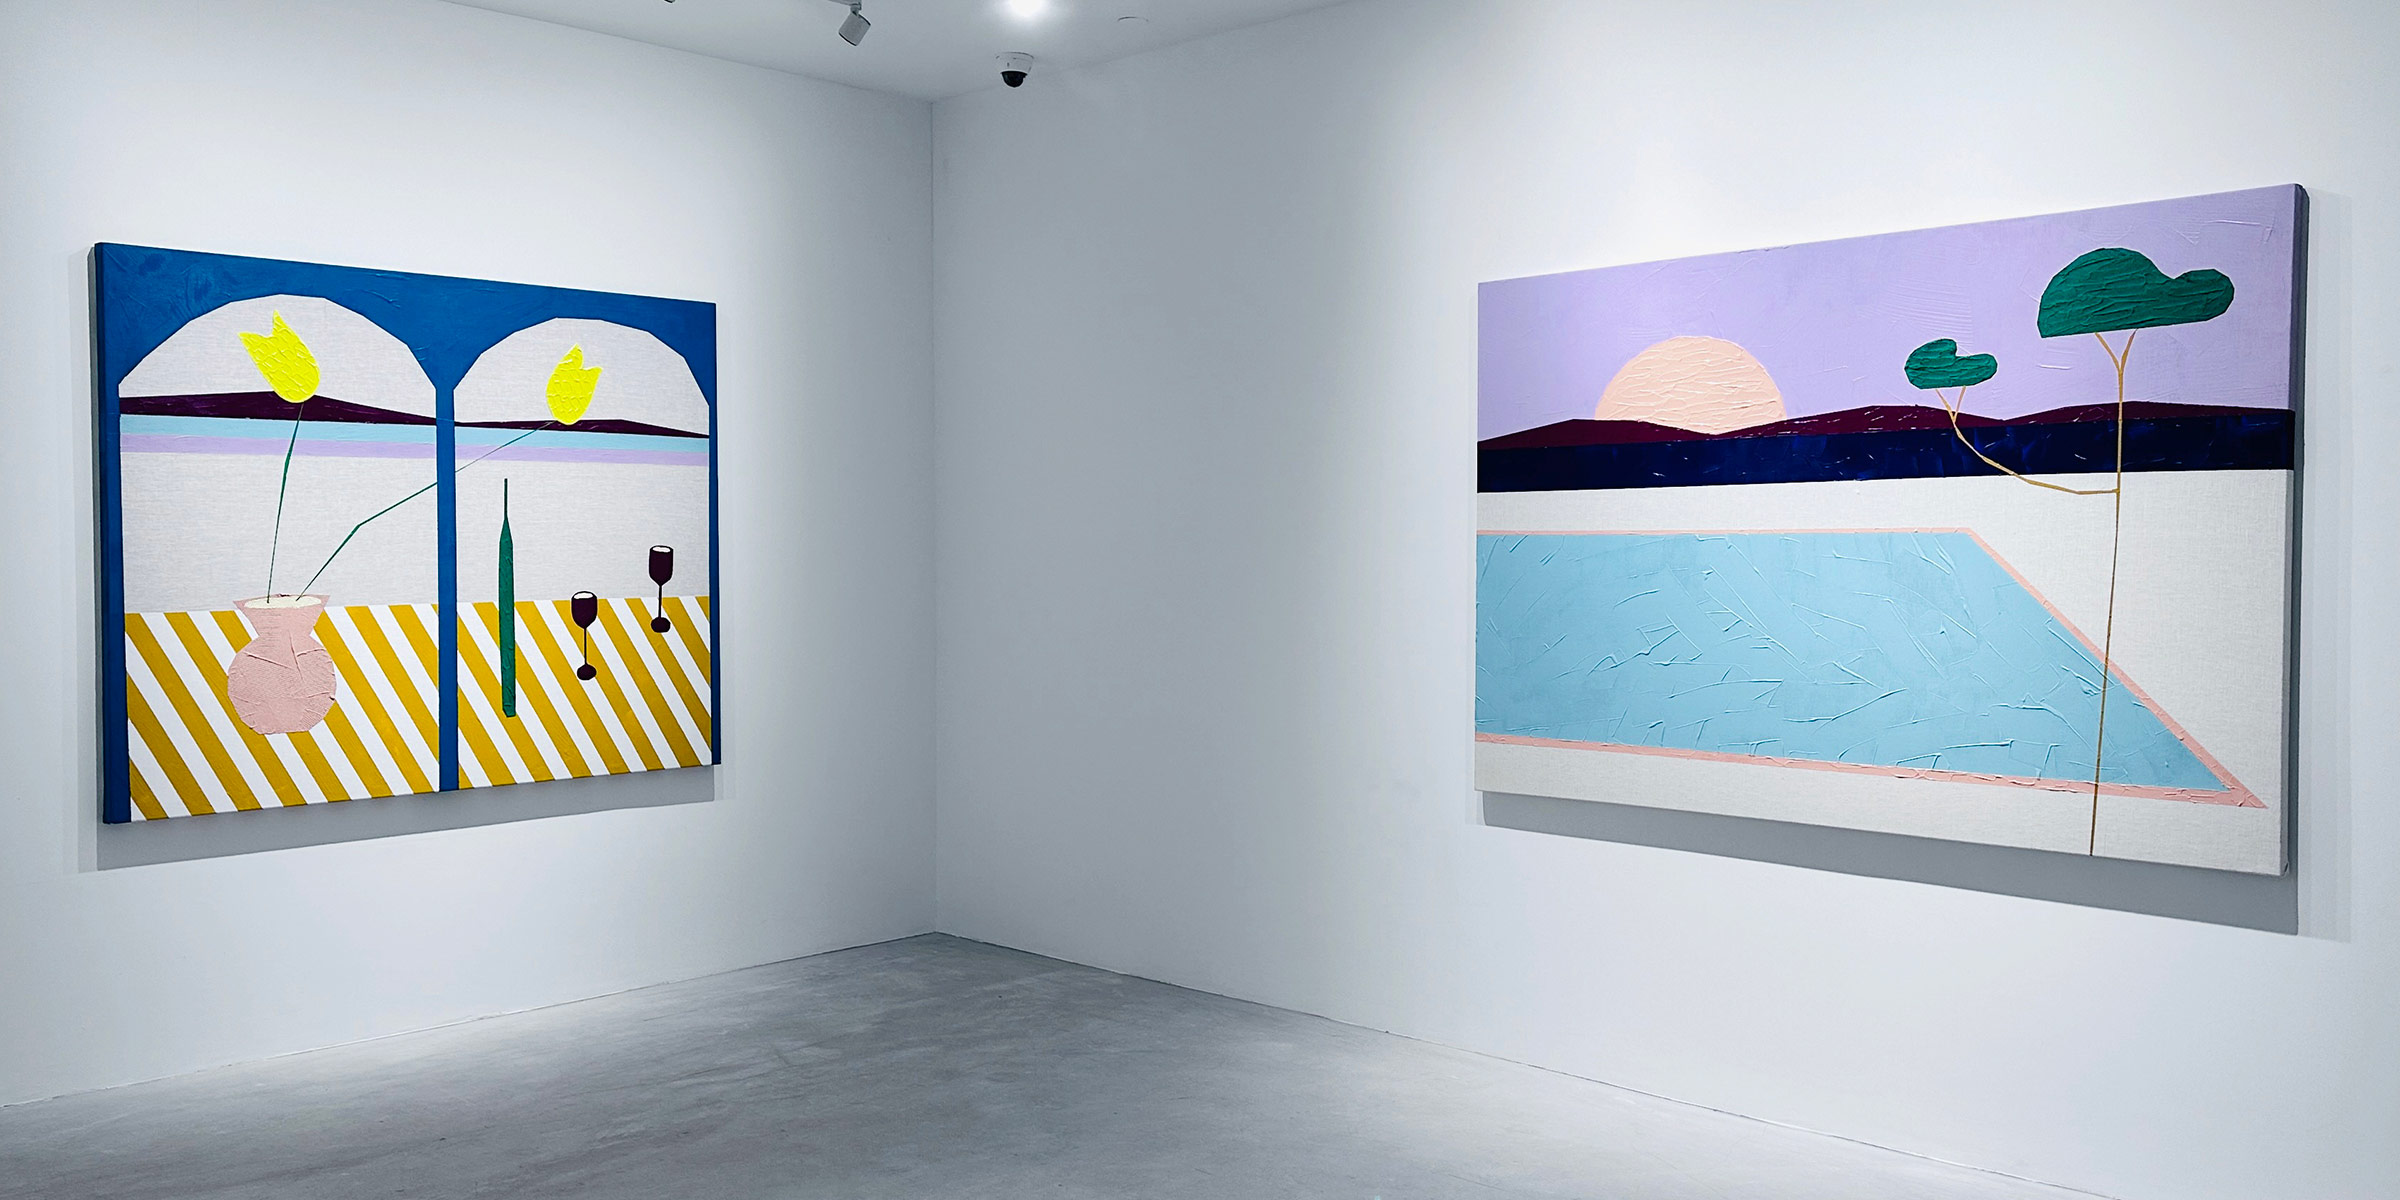 Glimmers of Summer by Ben Arpea with Over the Influence art gallery, Hong Kong